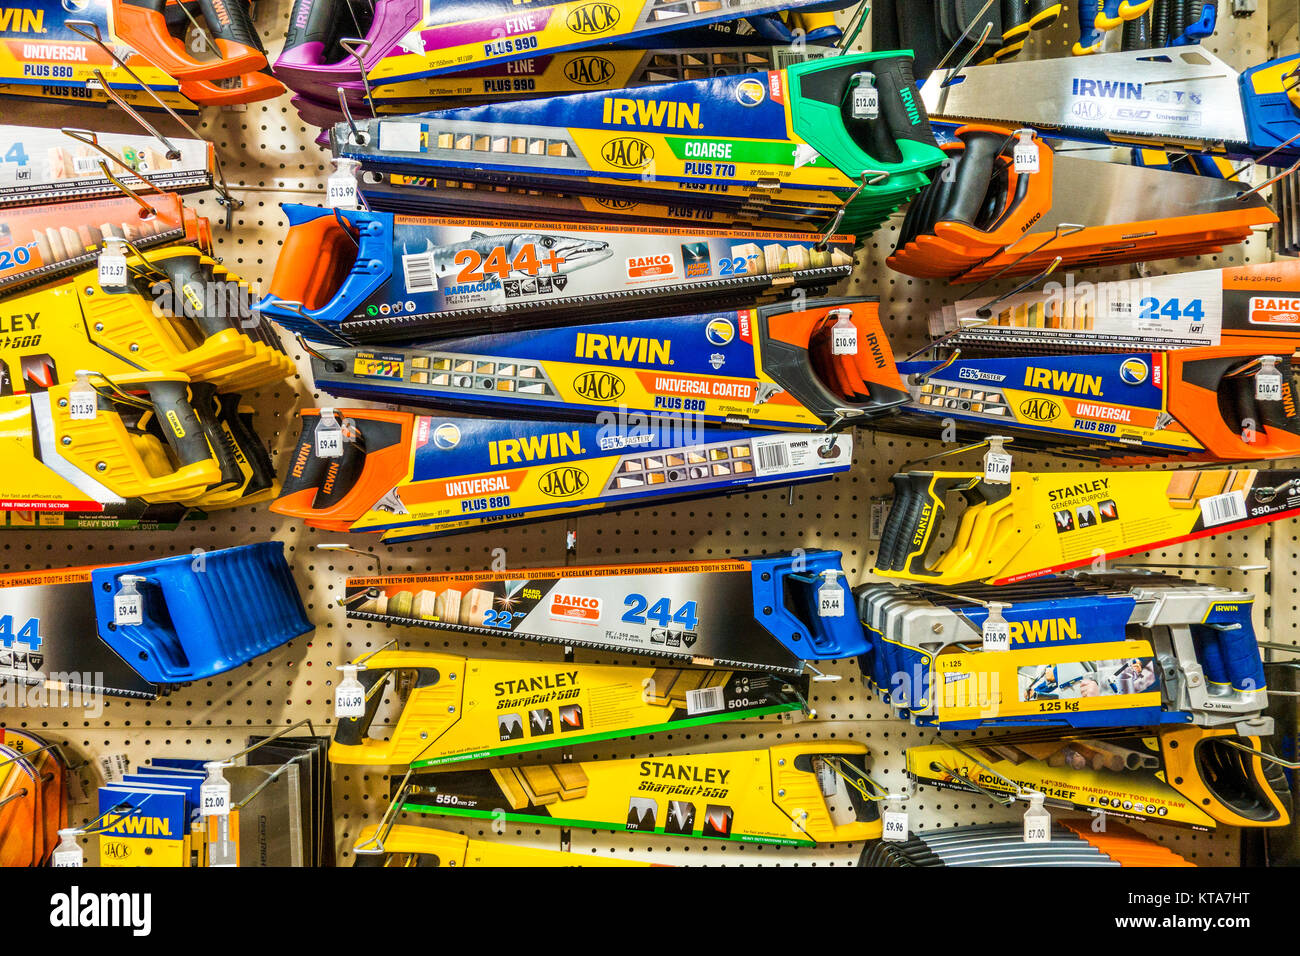 An extensive and colourful selection of Stanley and Irwin hand saws of varying size, on display in a Homebase DIY store in England, UK. Stock Photo